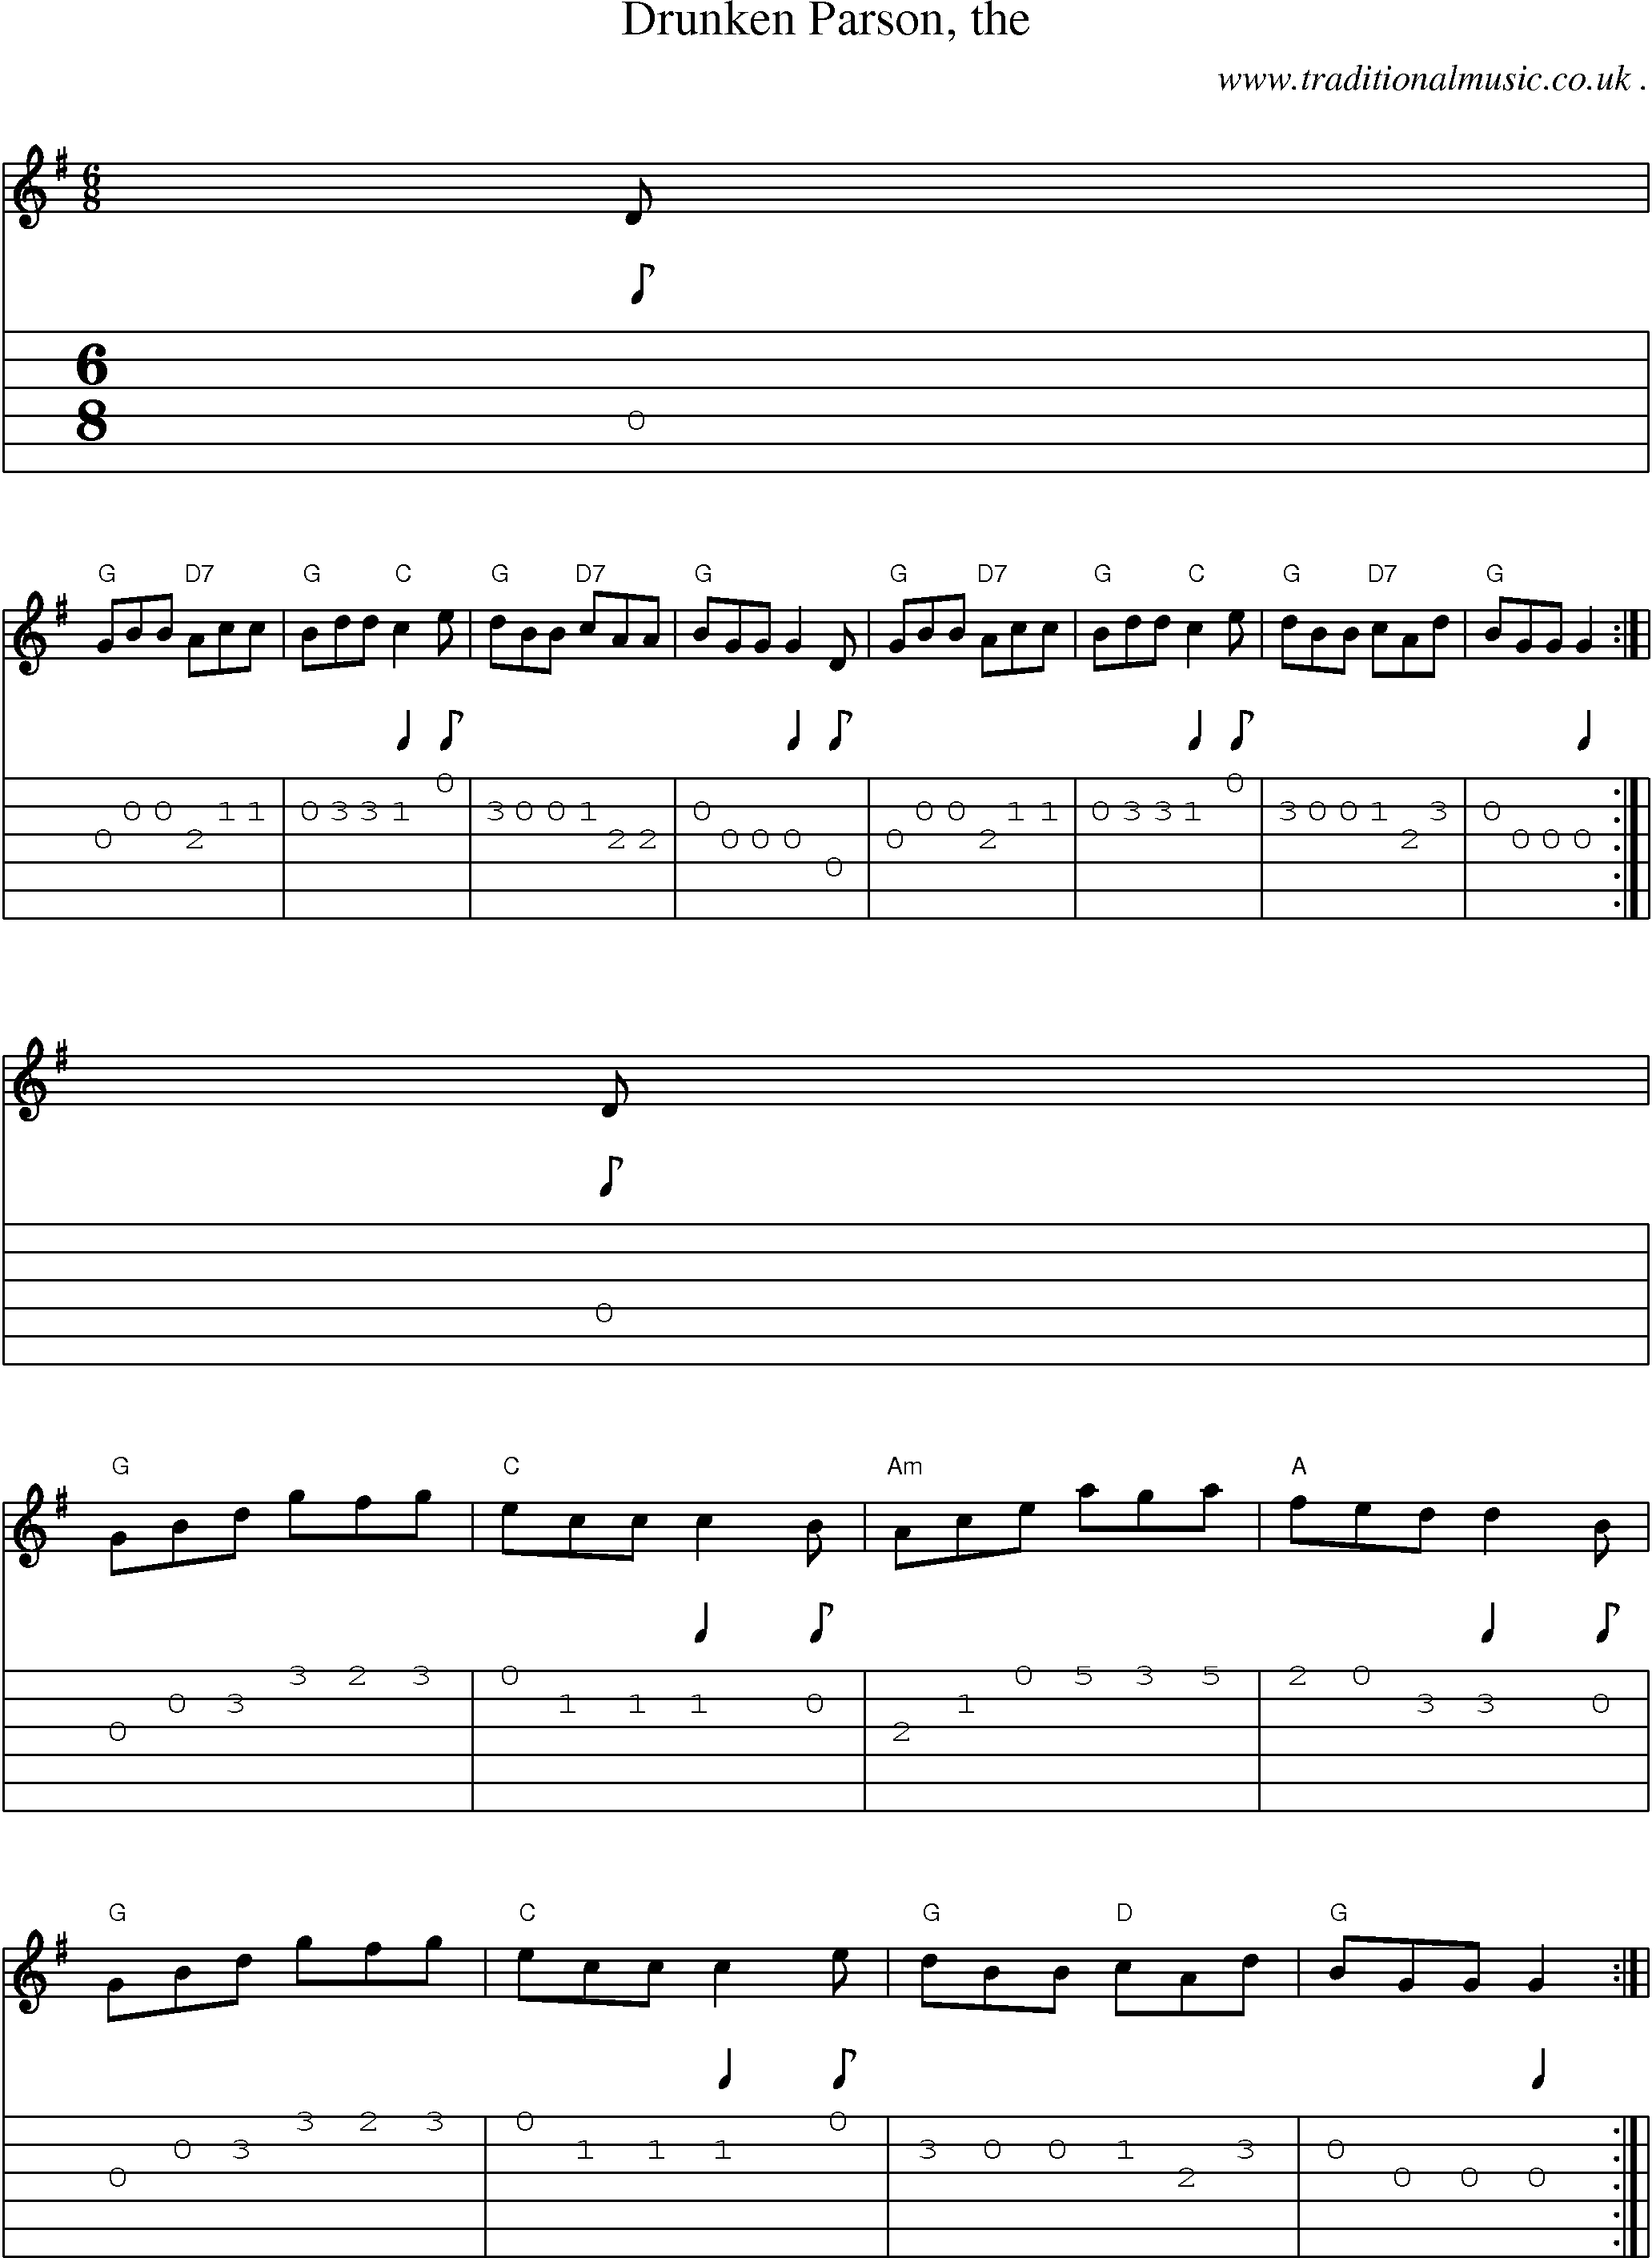 Sheet-music  score, Chords and Guitar Tabs for Drunken Parson The